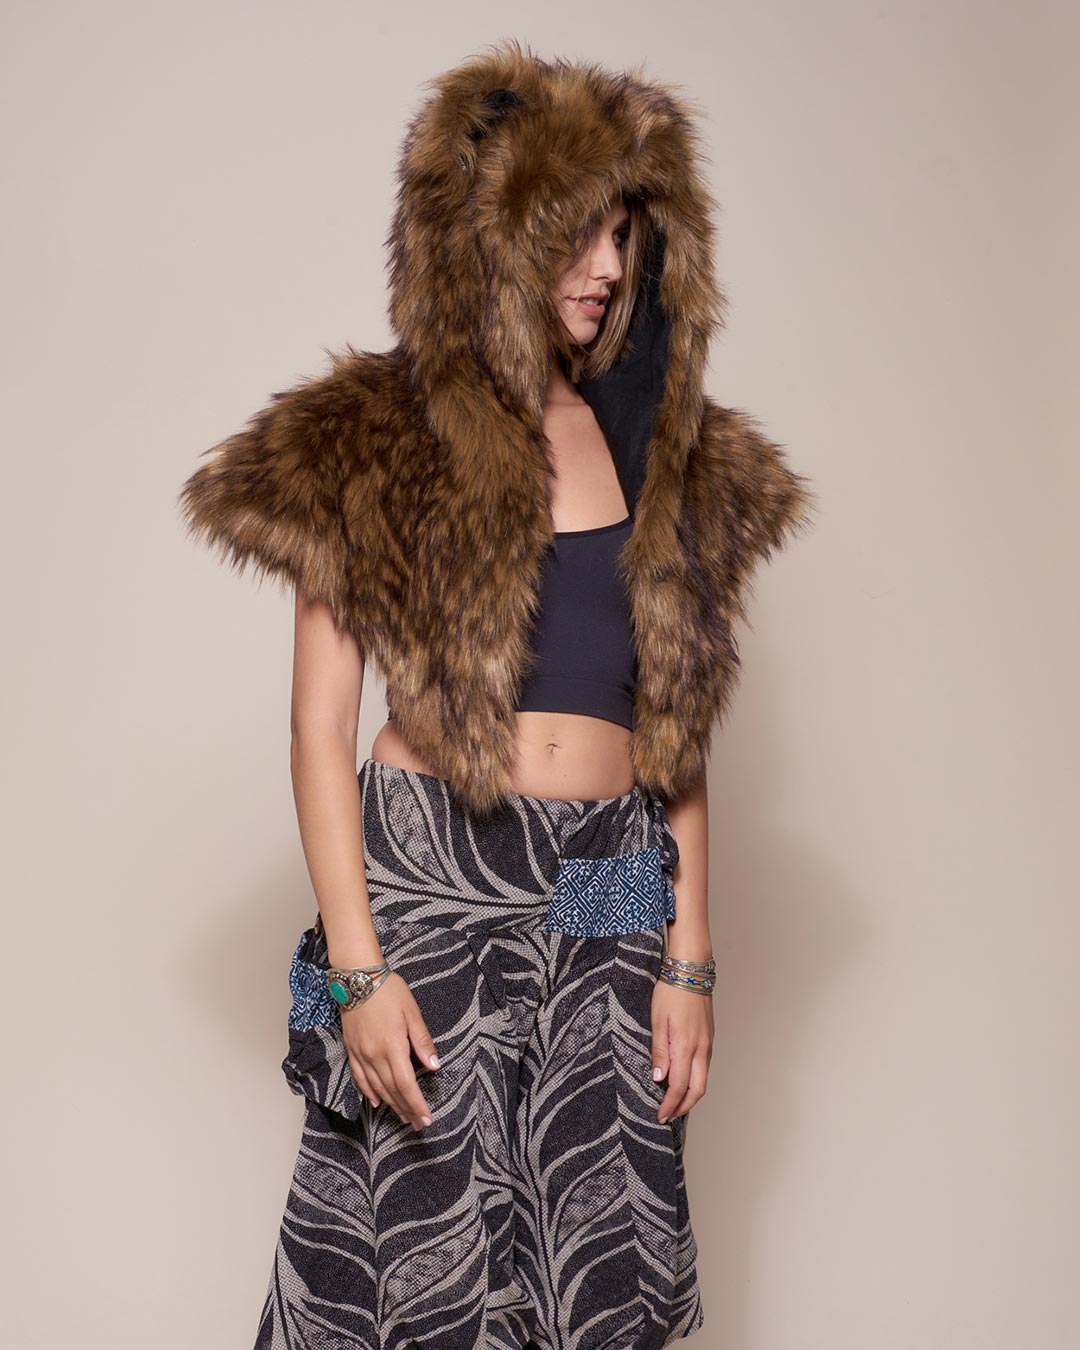 Faux Fur Shawl with Hood in Grizzly Bear Design on Woman